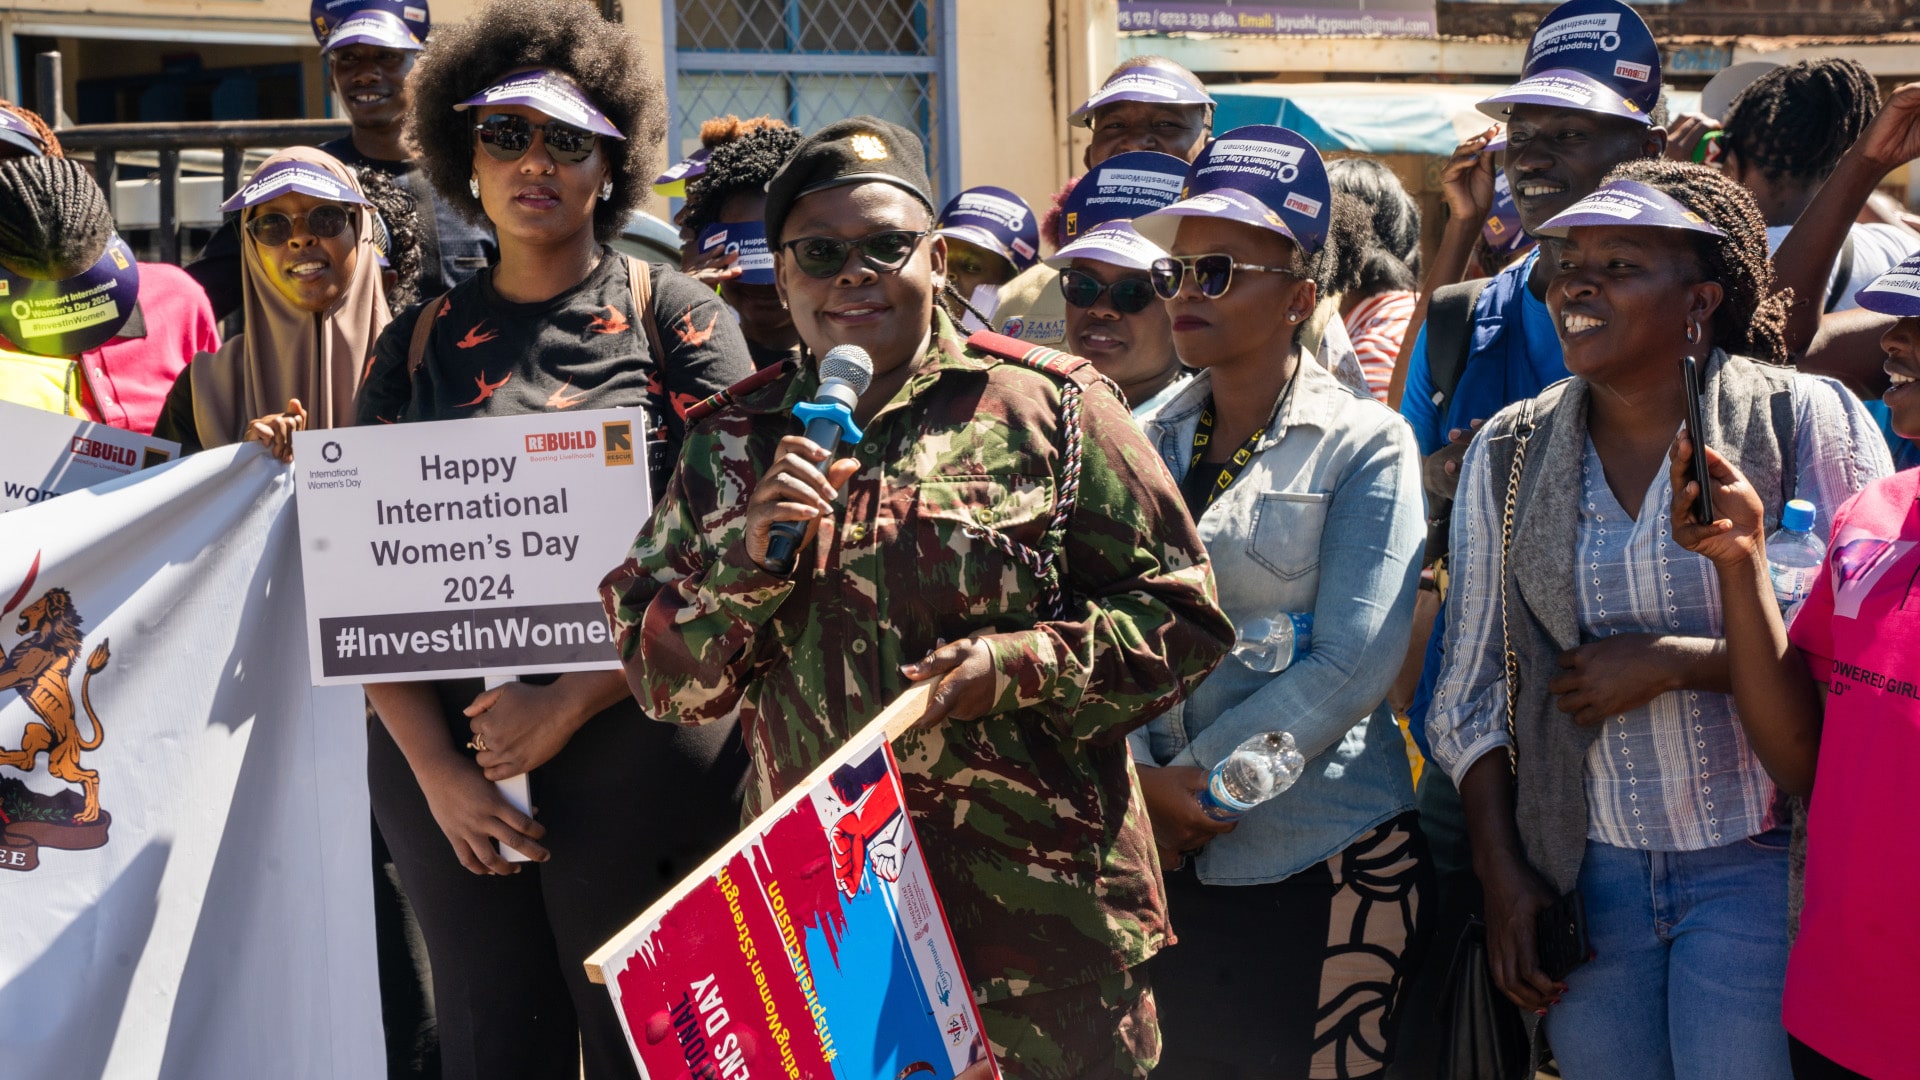 The acting Deputy County Commissioner of Rongai addressing participants who joined the International Women’s Day march from Nairobi Women’s Hospital, Rongai, to St. Faith Anglican Church